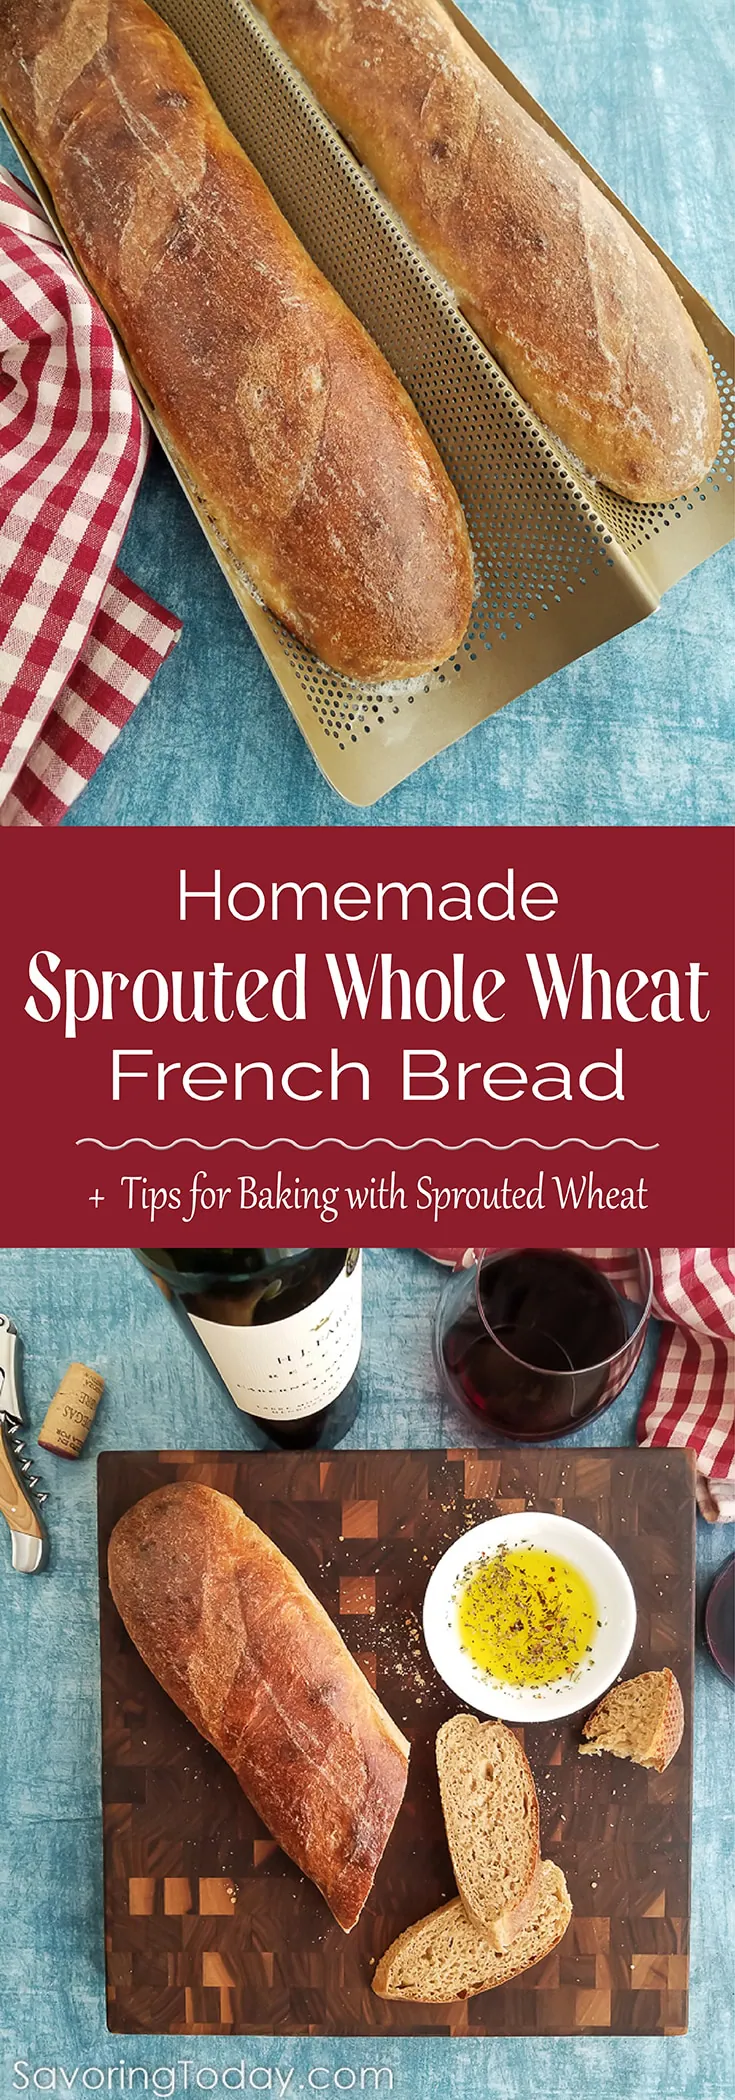 Learn important tips for baking with sprouted wheat by making this delicious Sprouted Wheat French Bread recipe. You'll love the texture and chewy crust of this bread.